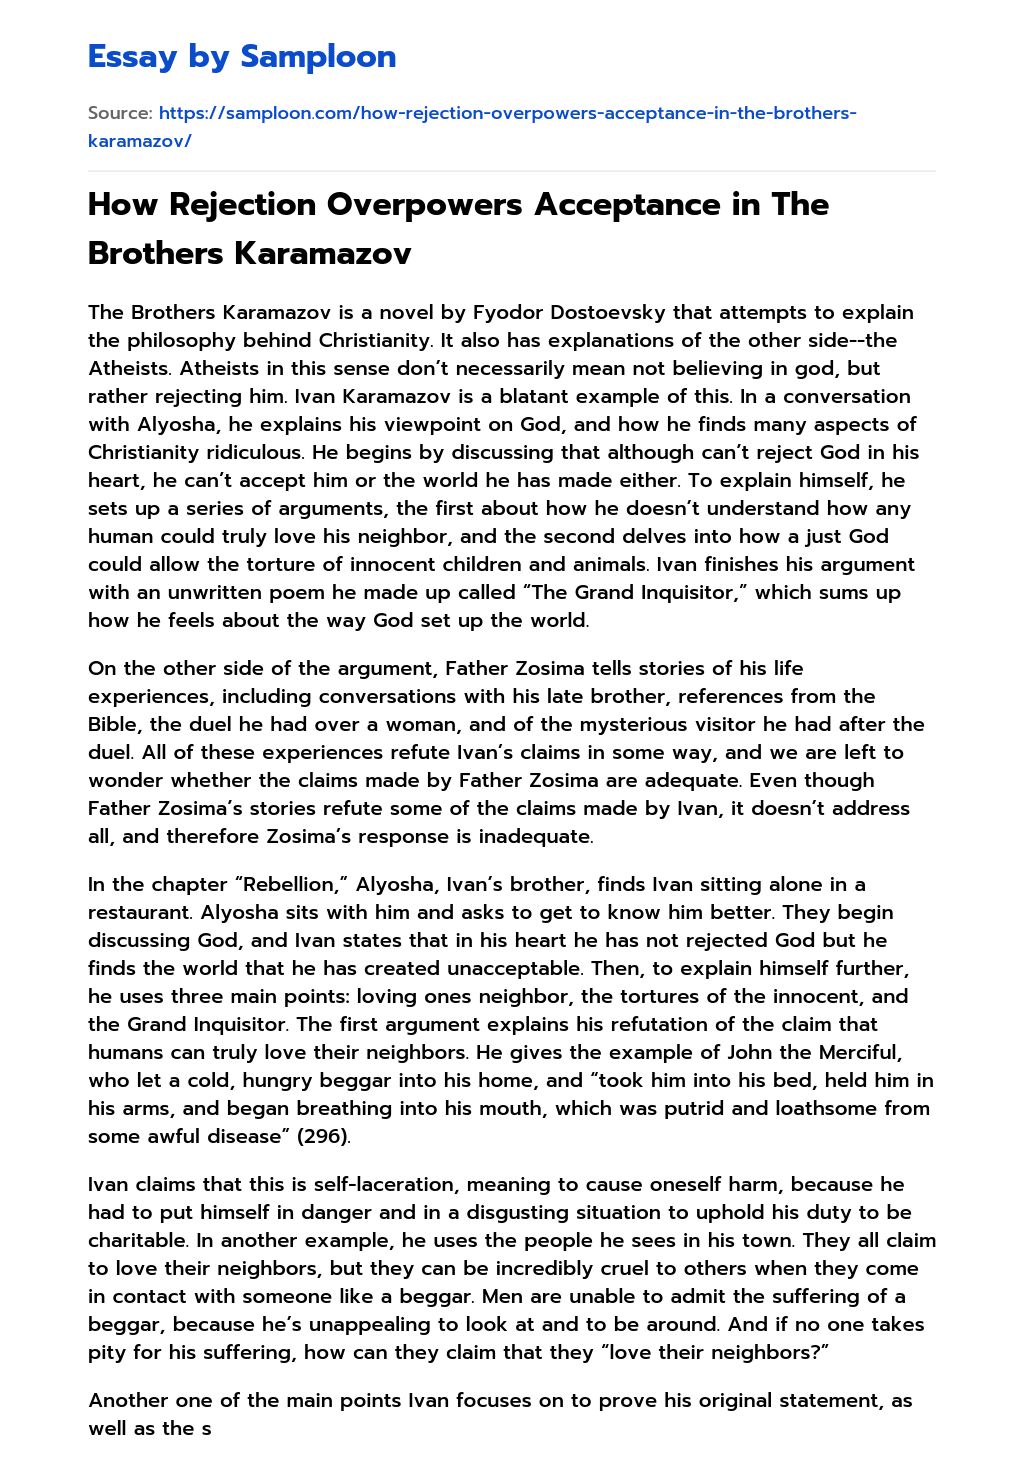 How Rejection Overpowers Acceptance in The Brothers Karamazov  essay